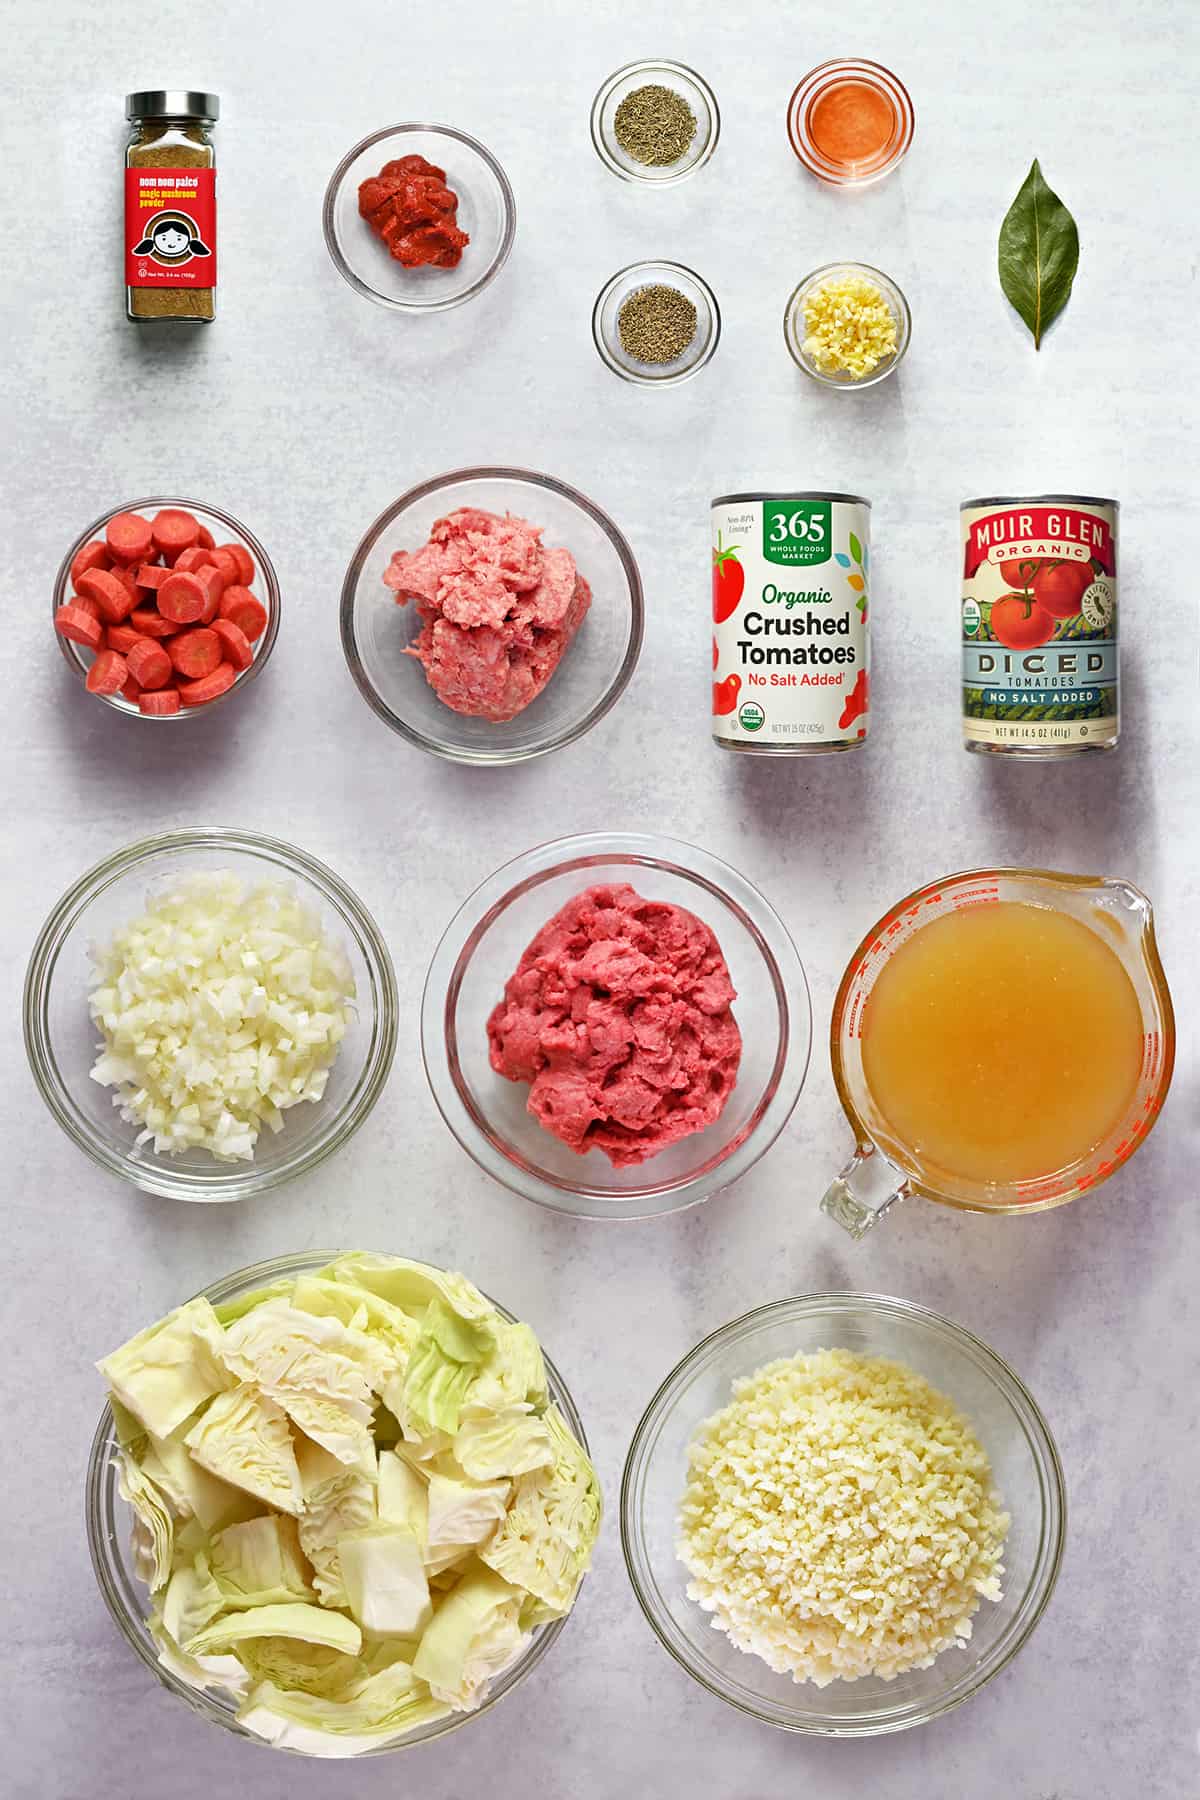 An overhead shot of the prepped ingredients to make cabbage roll soup.